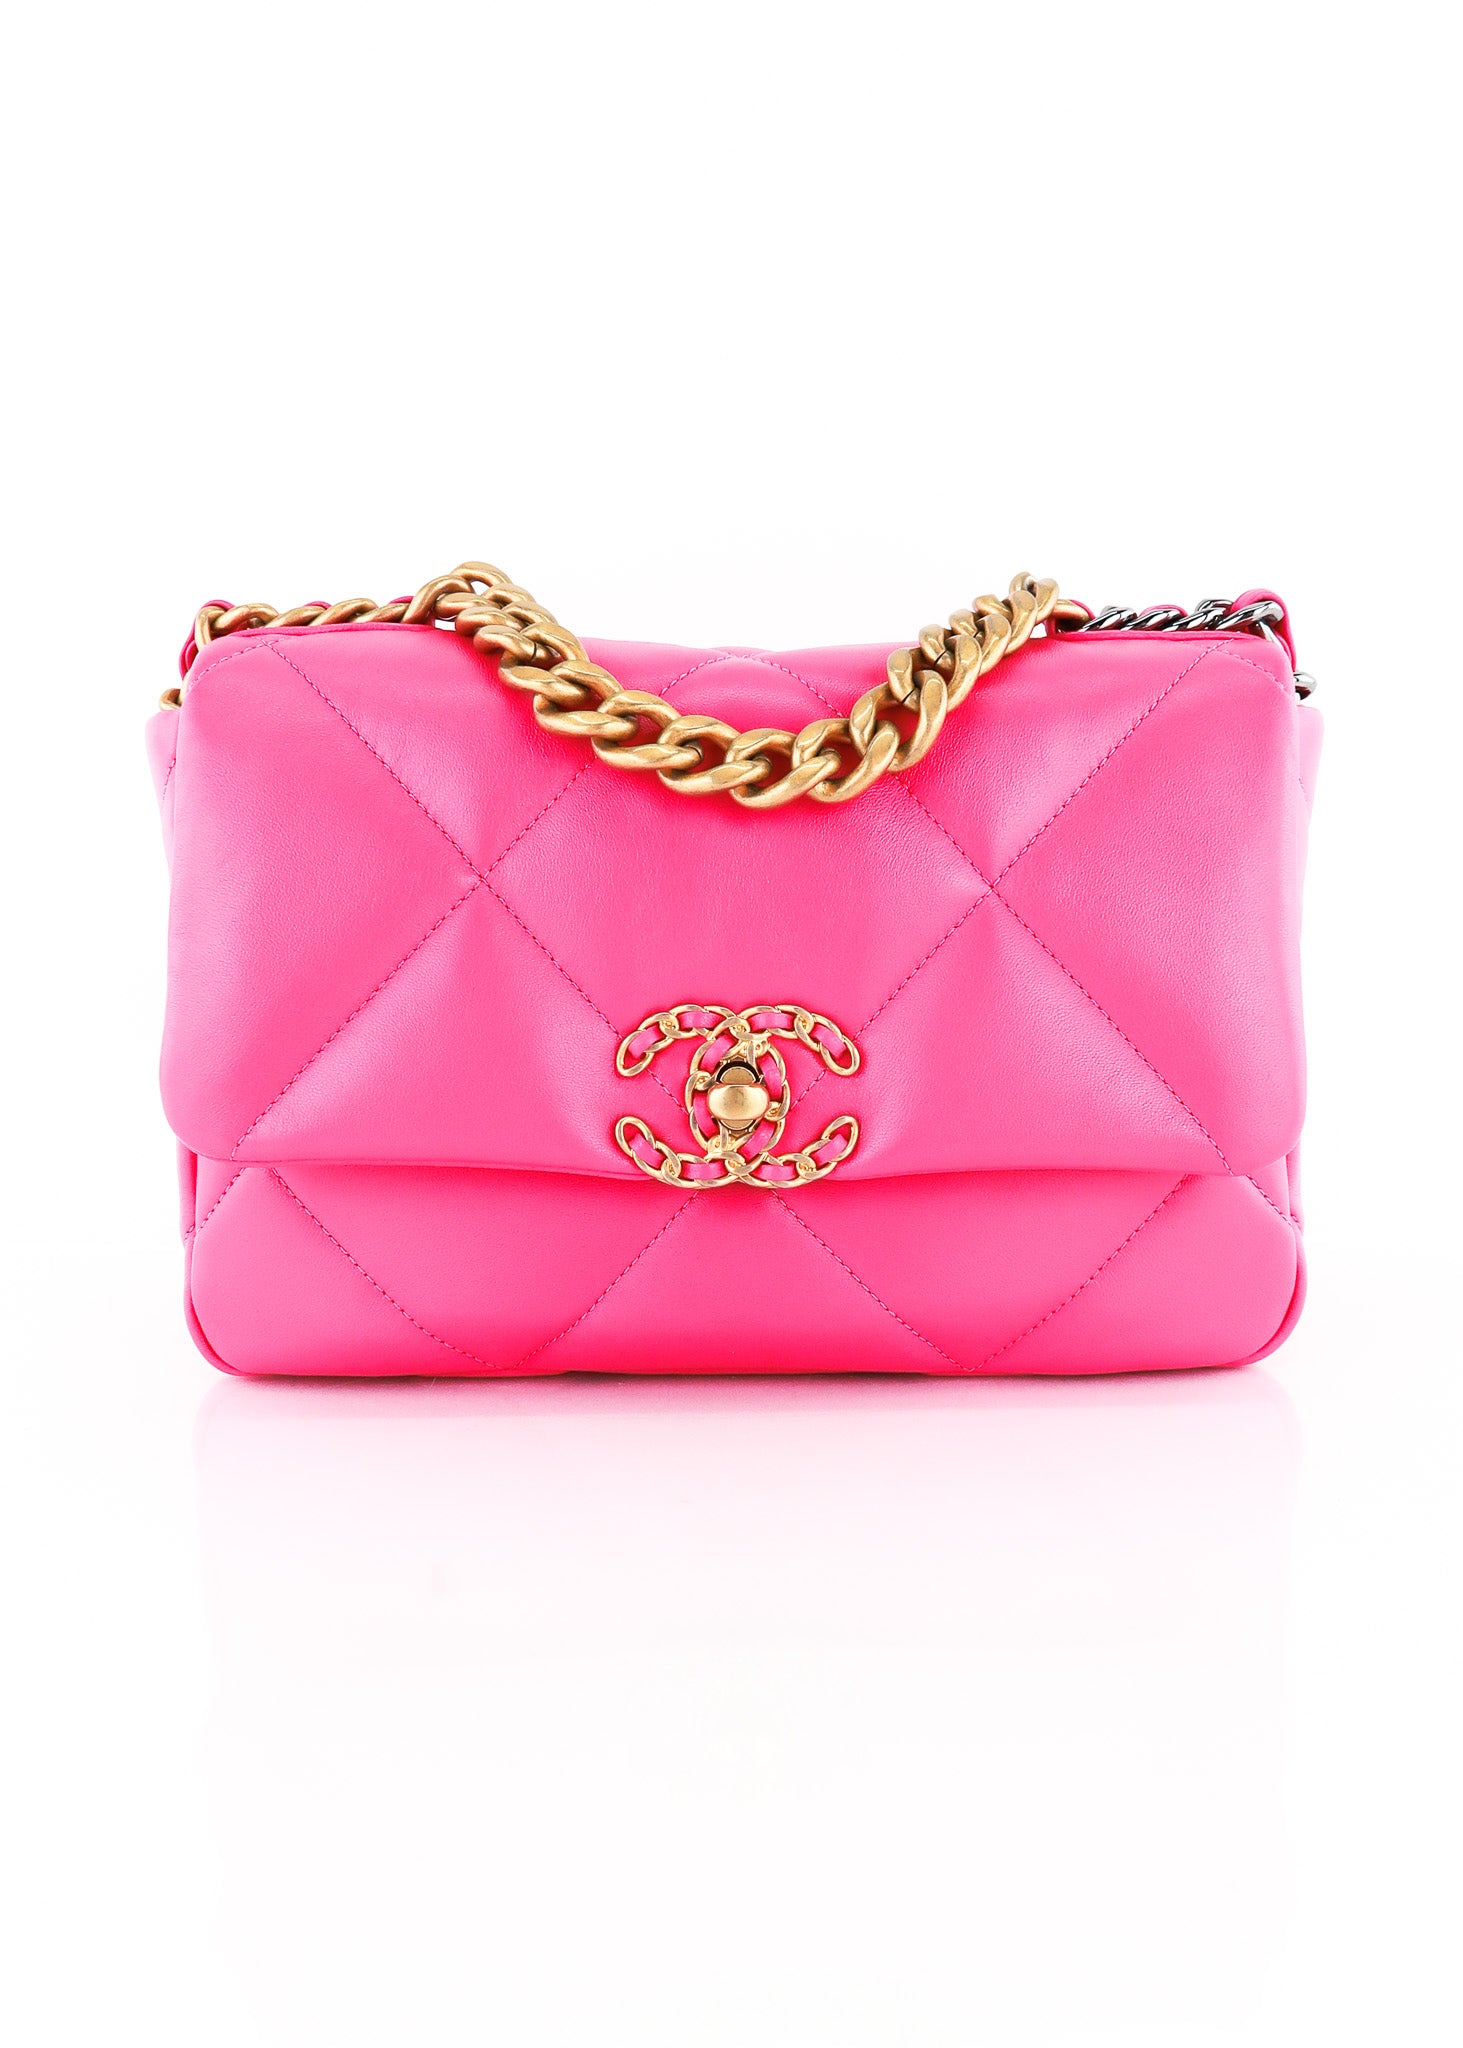 CHANEL Lambskin Quilted Chanel 19 Shopping Bag Pink 1060834